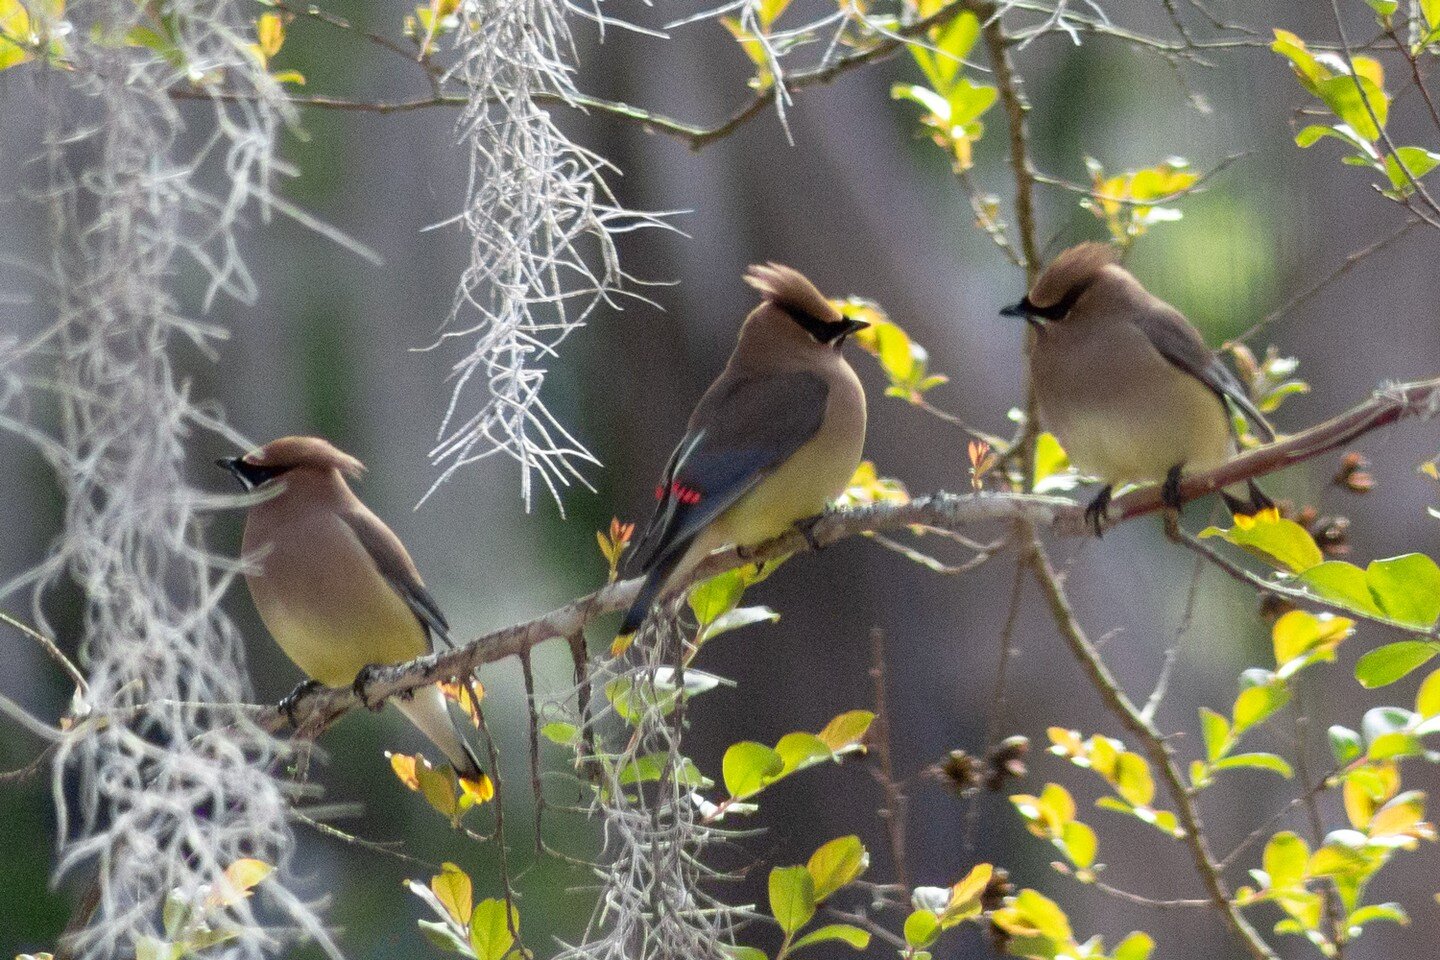 Cedar waxwings came through yesterday. They are so beautiful!!!